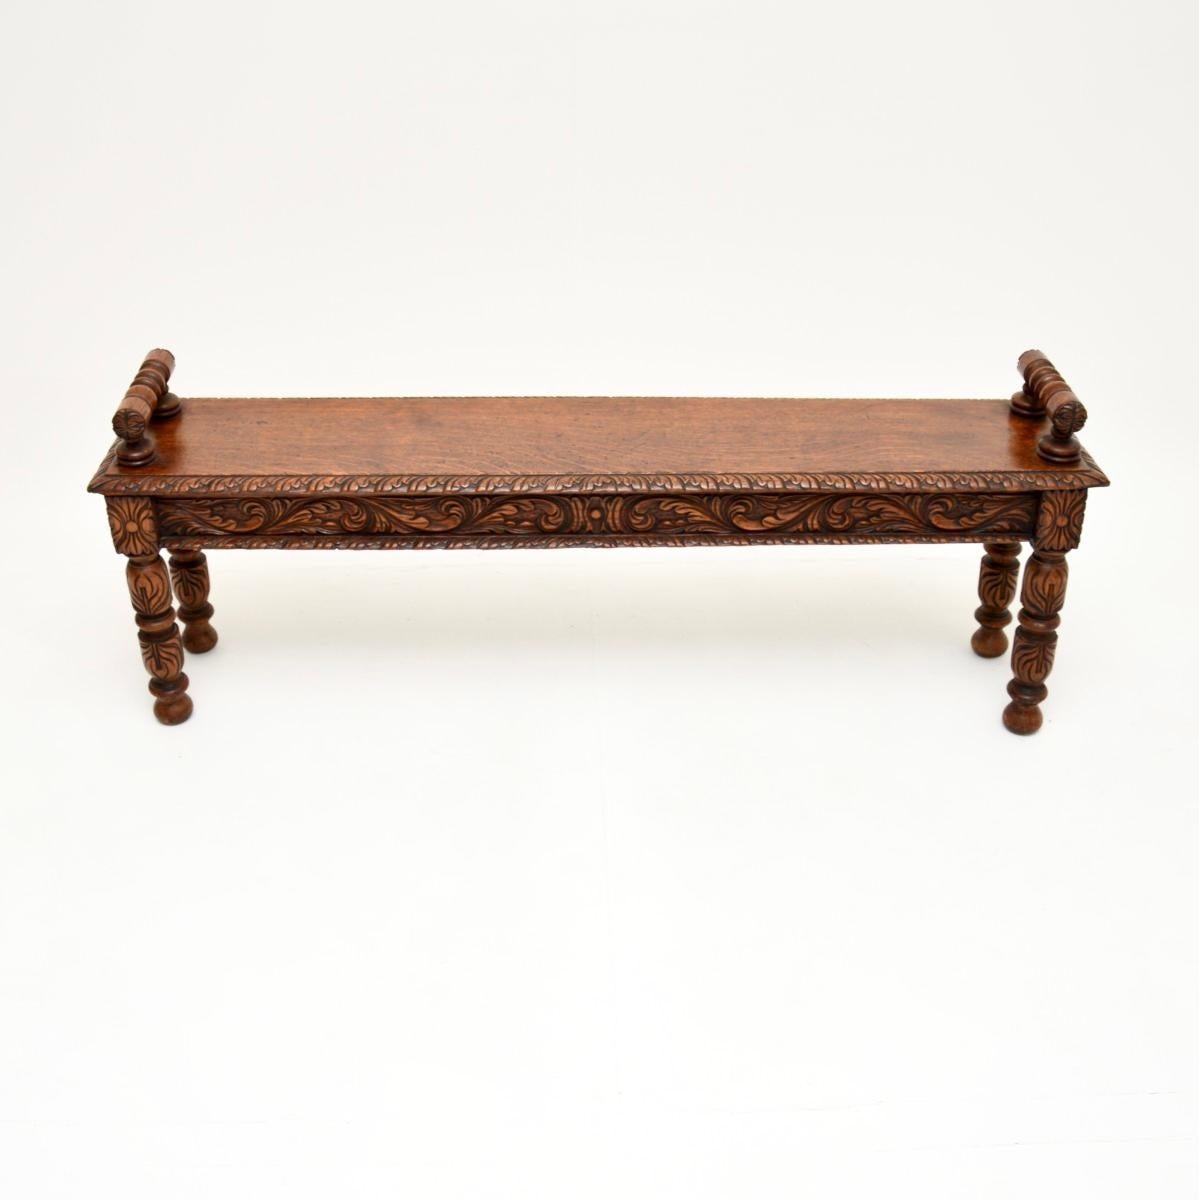 A wonderful antique Victorian carved oak bench, made in England and dating from around the 1870-1880 period.

It is of outstanding quality, with profuse and intricate carving throughout. It is a great size, perfect for use as an entry way bench, at